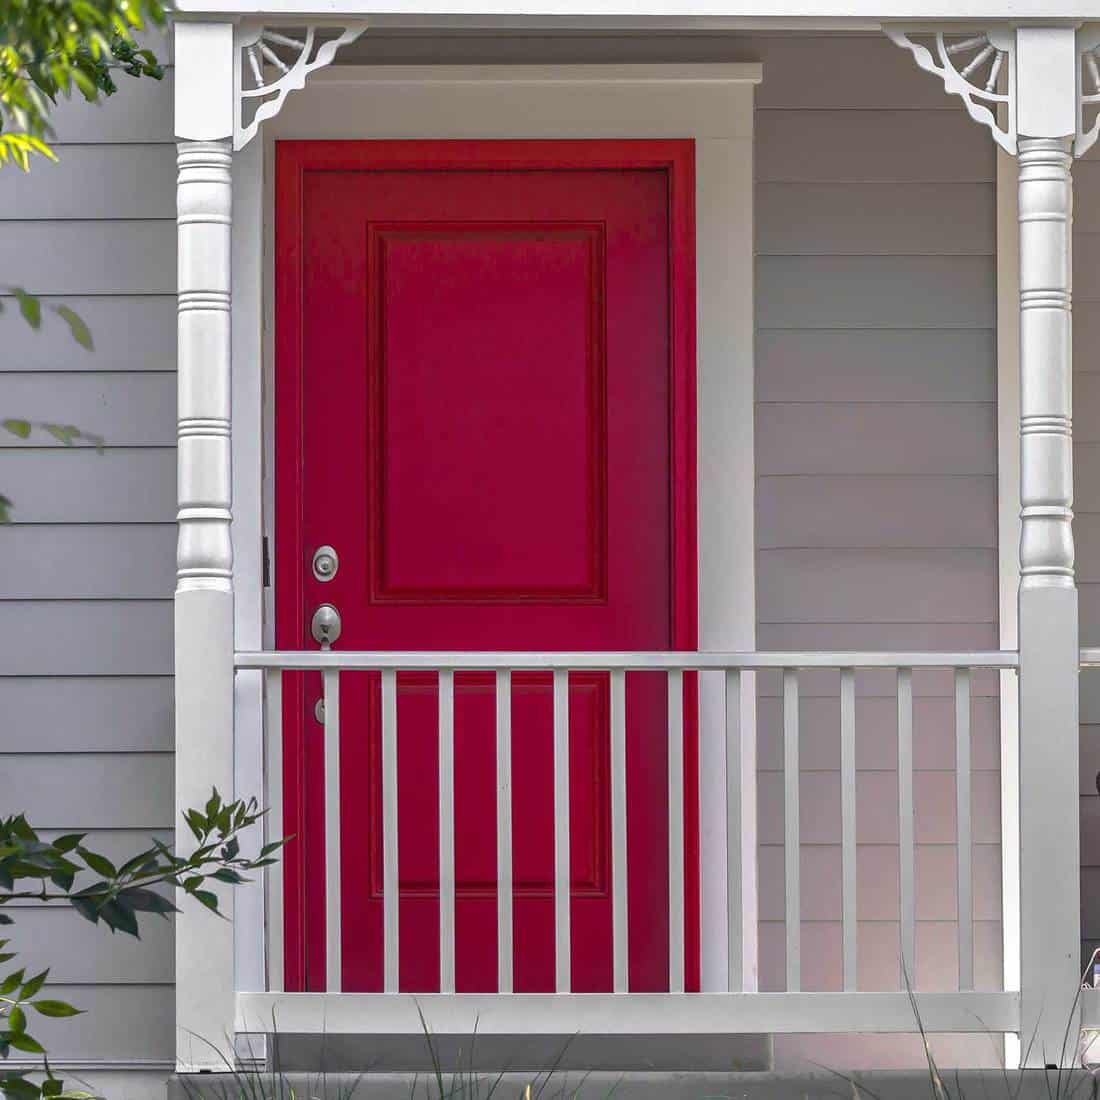 Vibrant red front door and balcony of a home